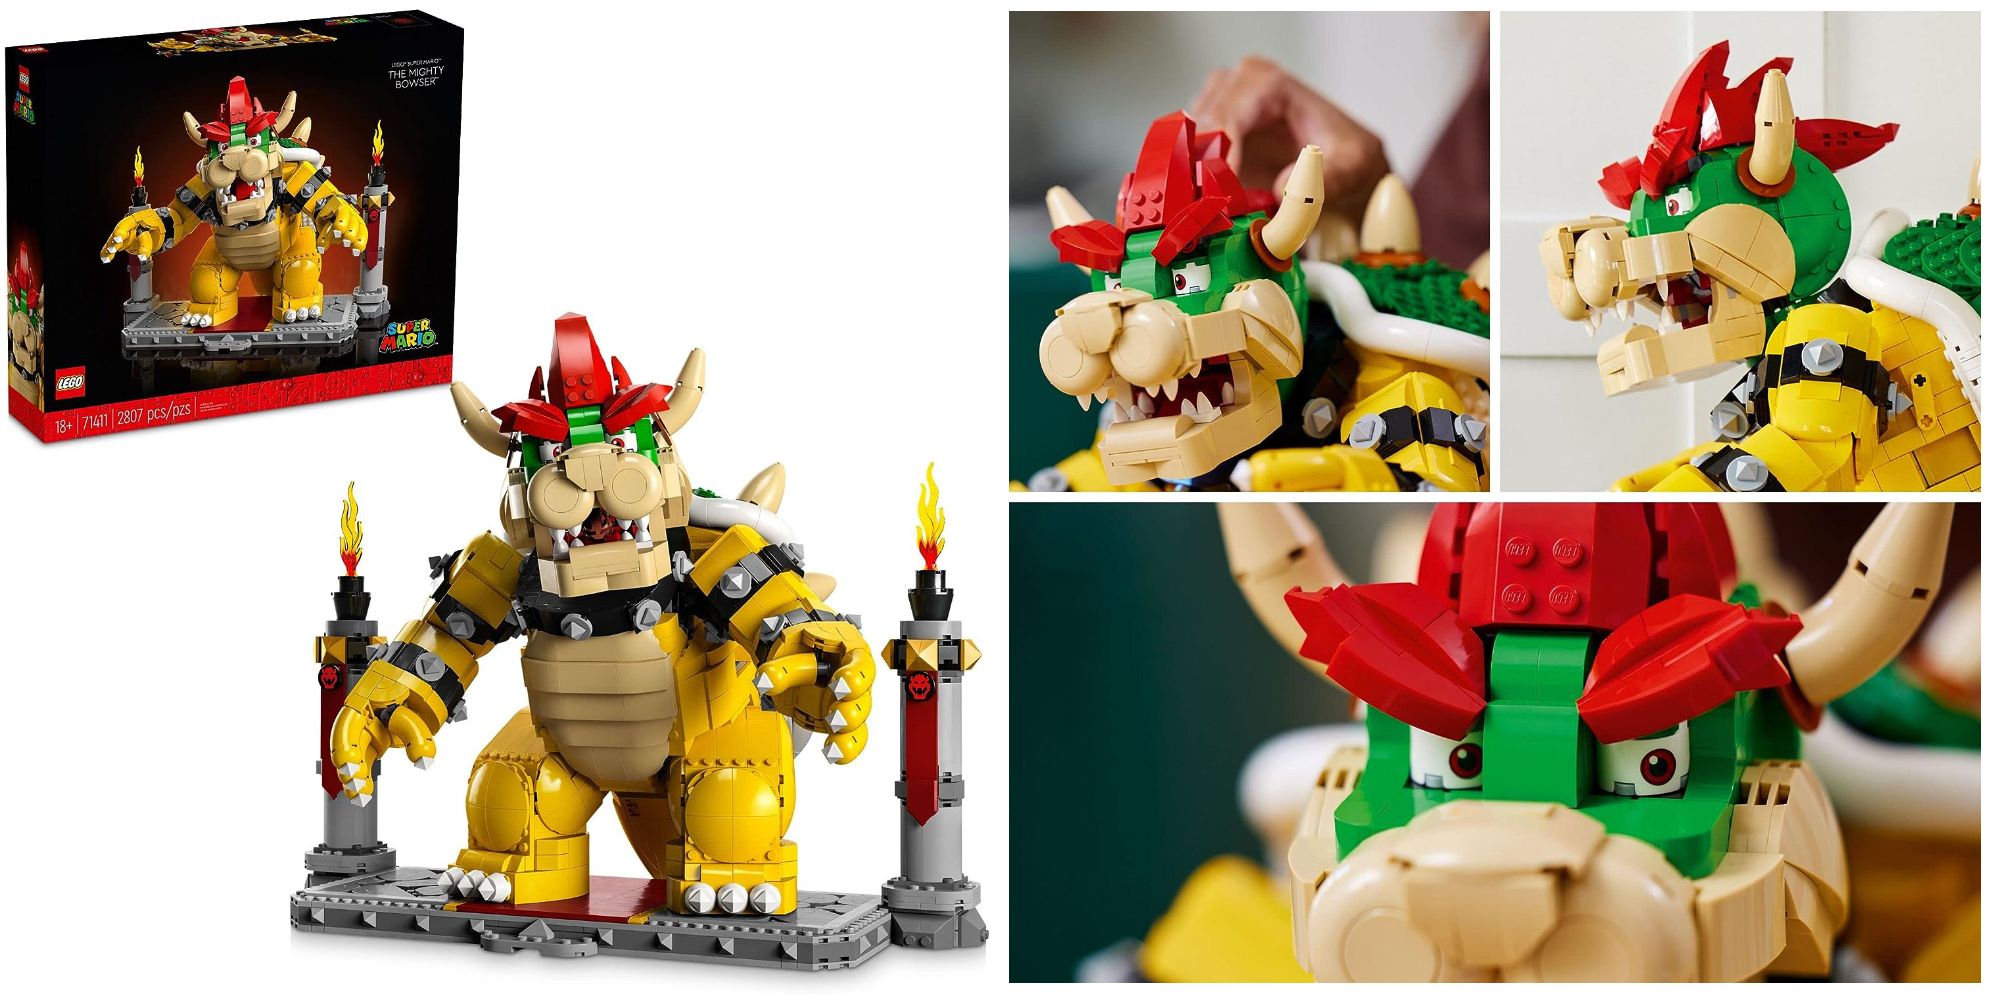 Bowser Is Now a Massive 2,807-Piece LEGO Mario Kit